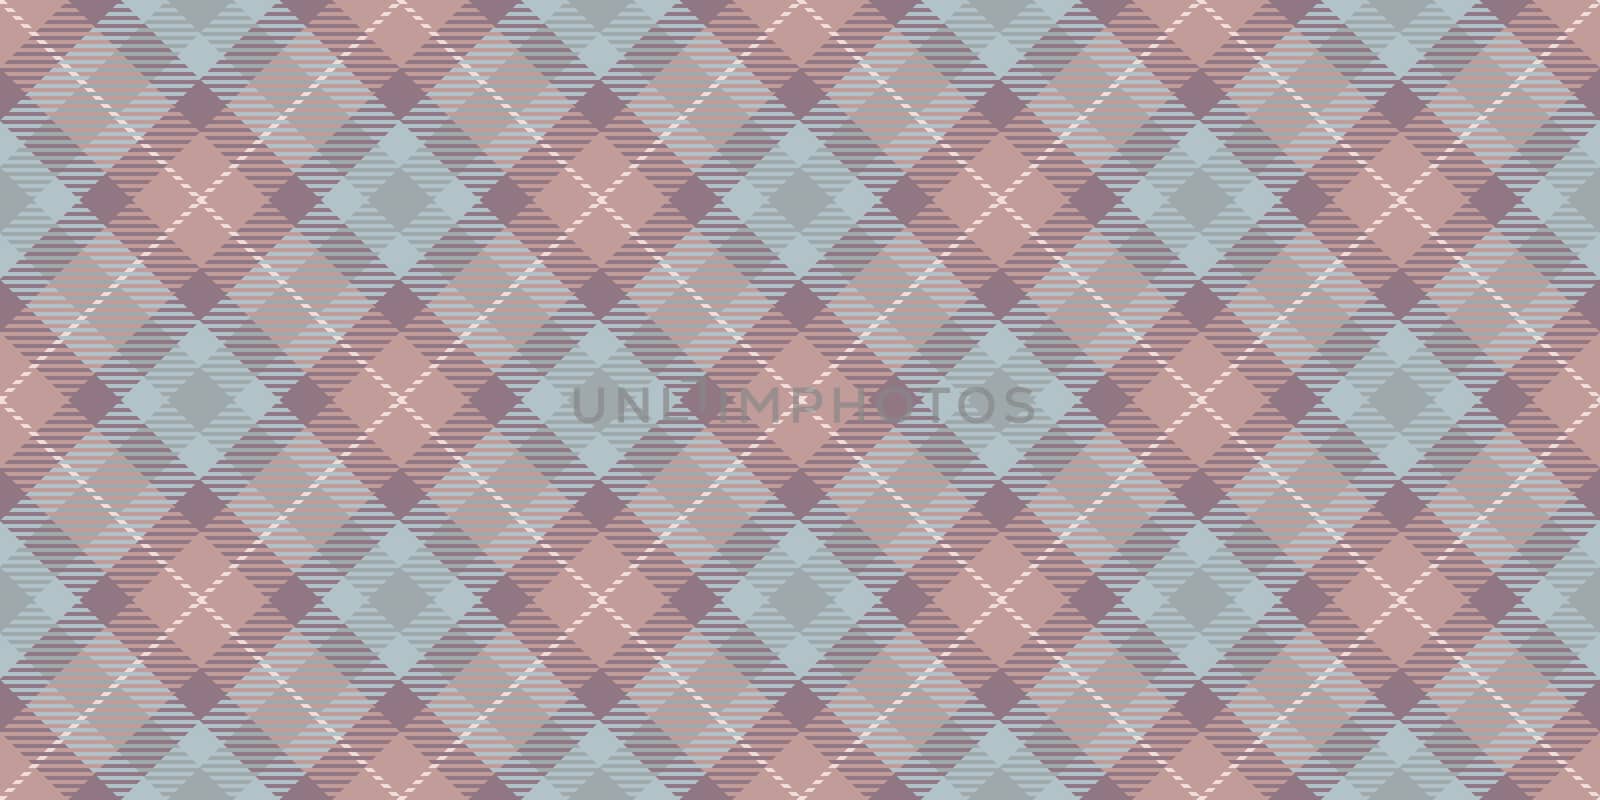 Weathered Seamless Checkered Rhombuses Pattern. Plaid Rug Background. Tartan Texture. by sanches812